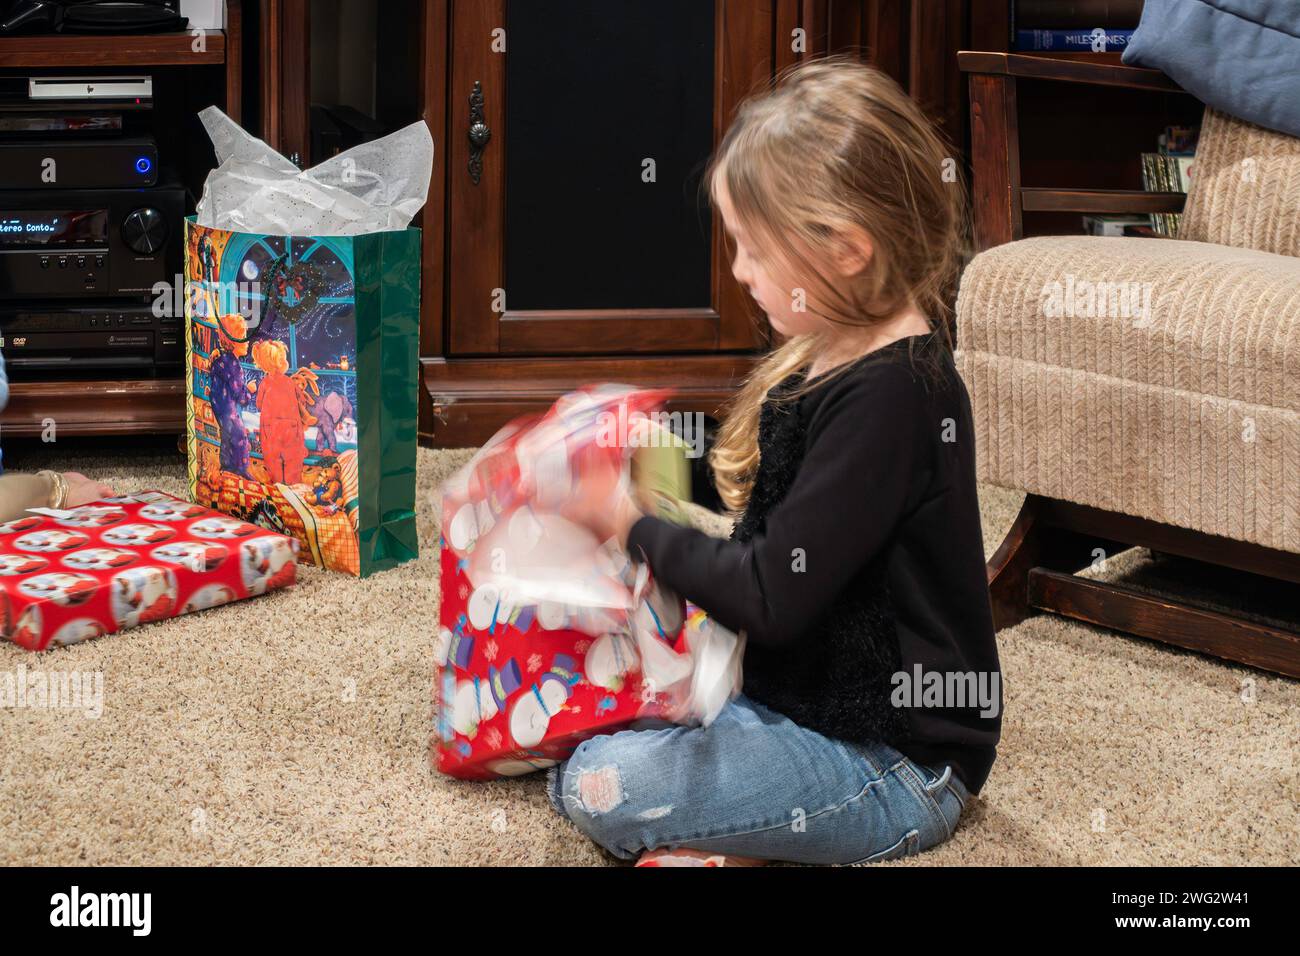 A 5-6 year old Caucasian girl sitting on floor while tearing off gift wrap from a Christmas present on Christmas Day. USA. Stock Photo